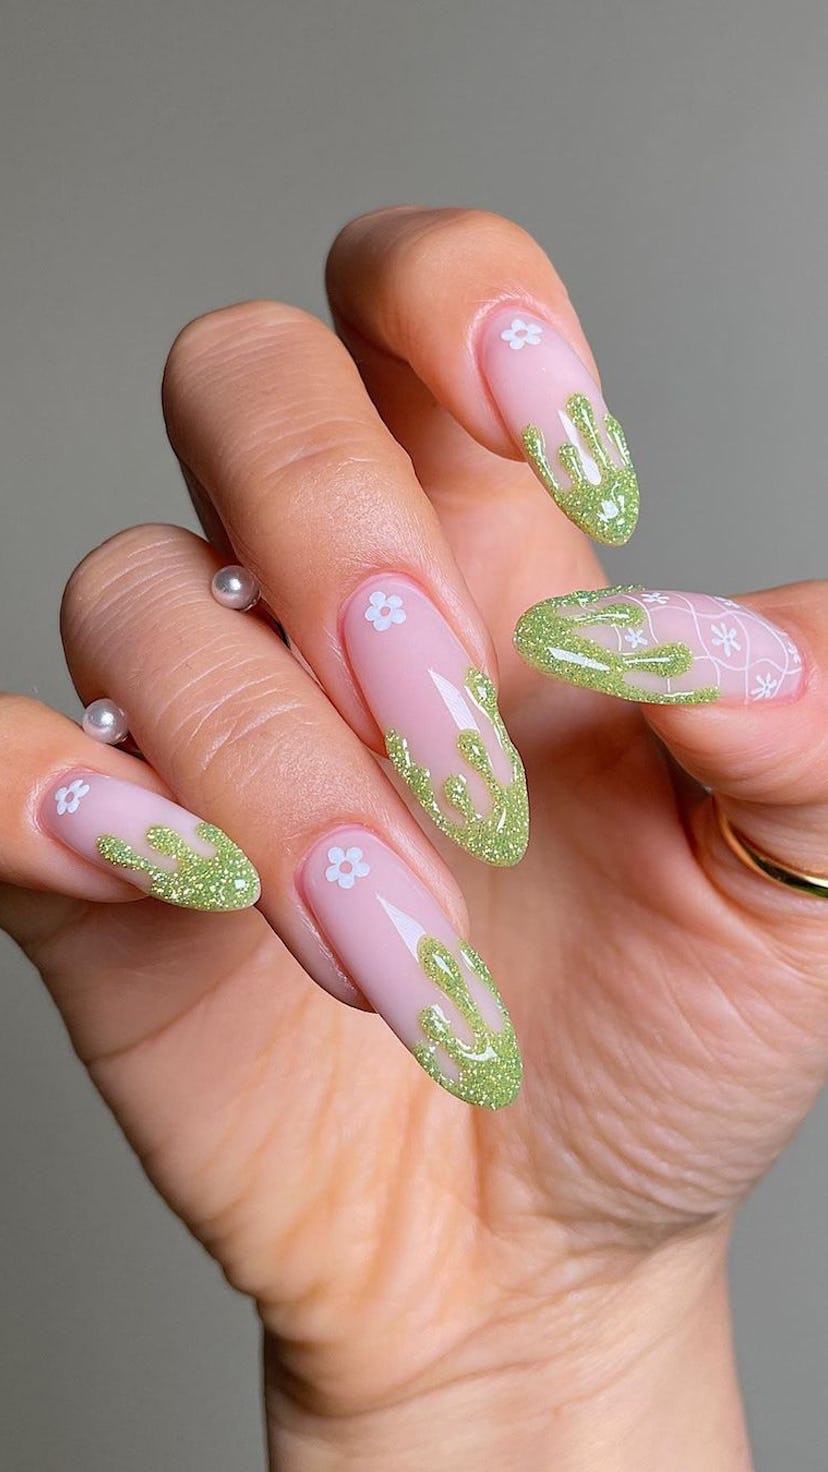 For simple St. Patrick's Day nails in 2023, try a light green French tip design.